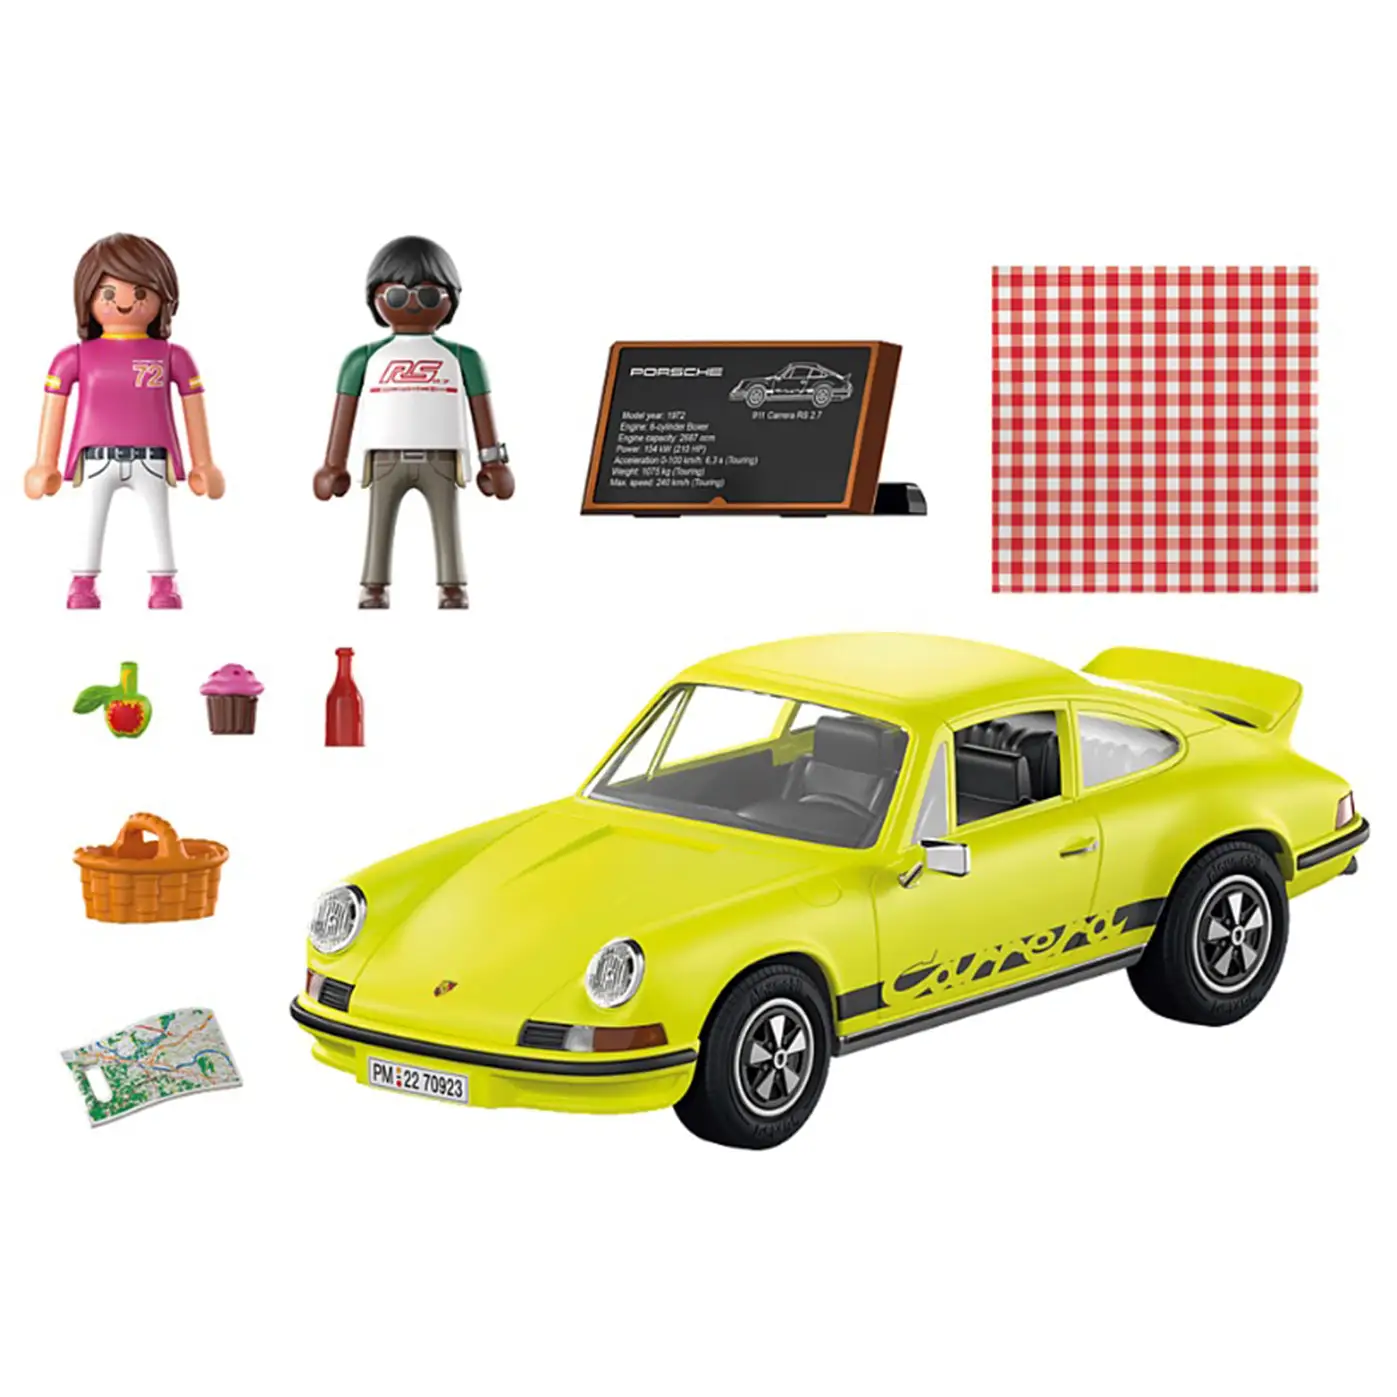 Playmobil Porsche 911 Carrera RS 2.7 70923 (for Kids 5 Years